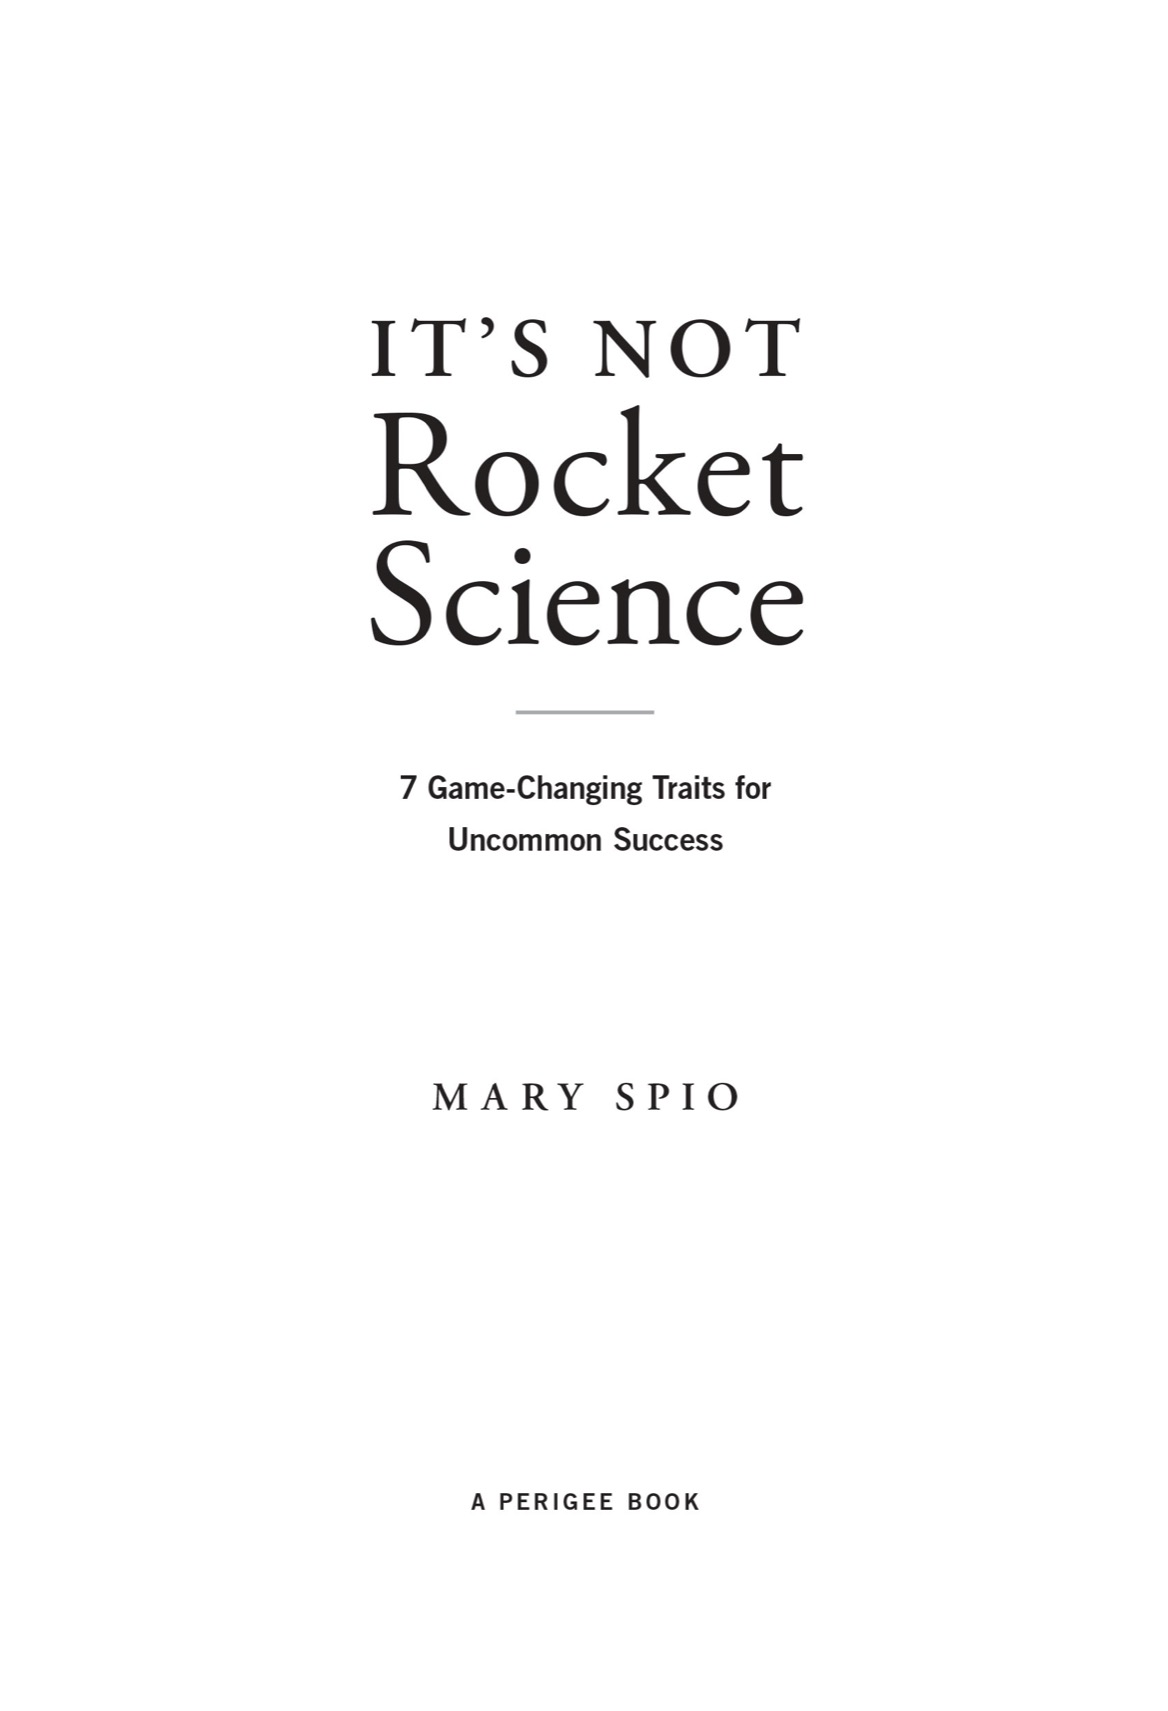 Its Not Rocket Science 7 Game-Changing Traits for Uncommon Success - image 2